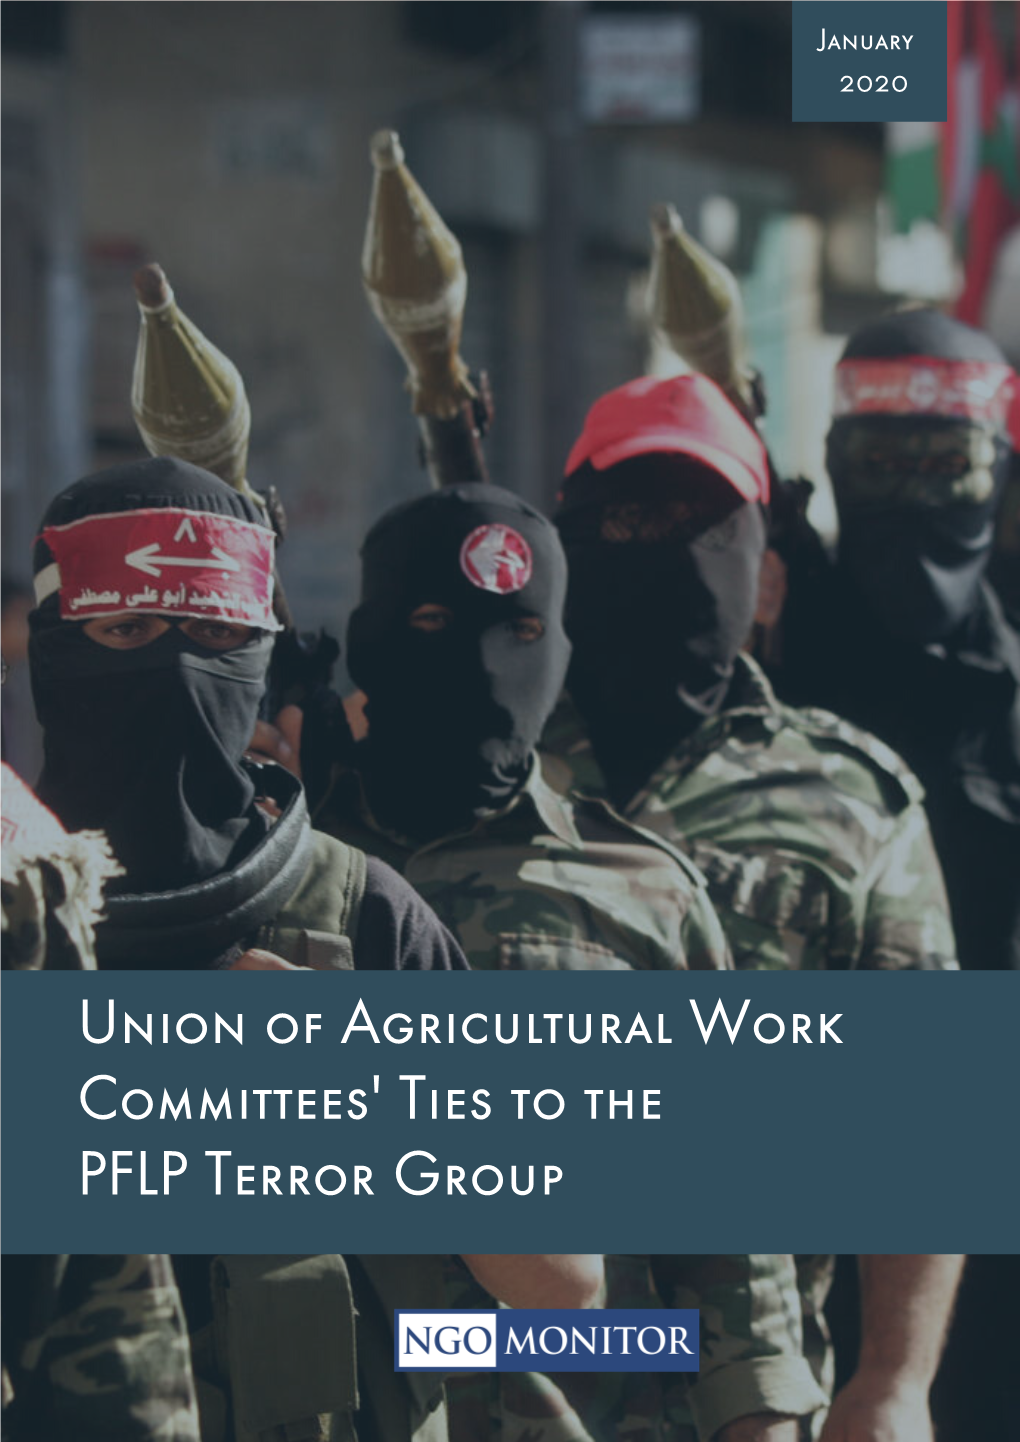 Union of Agricultural Work Committees' Ties to the PFLP Terror Group Union of Agricultural Work Committees’ Ties to the PFLP Terror Group